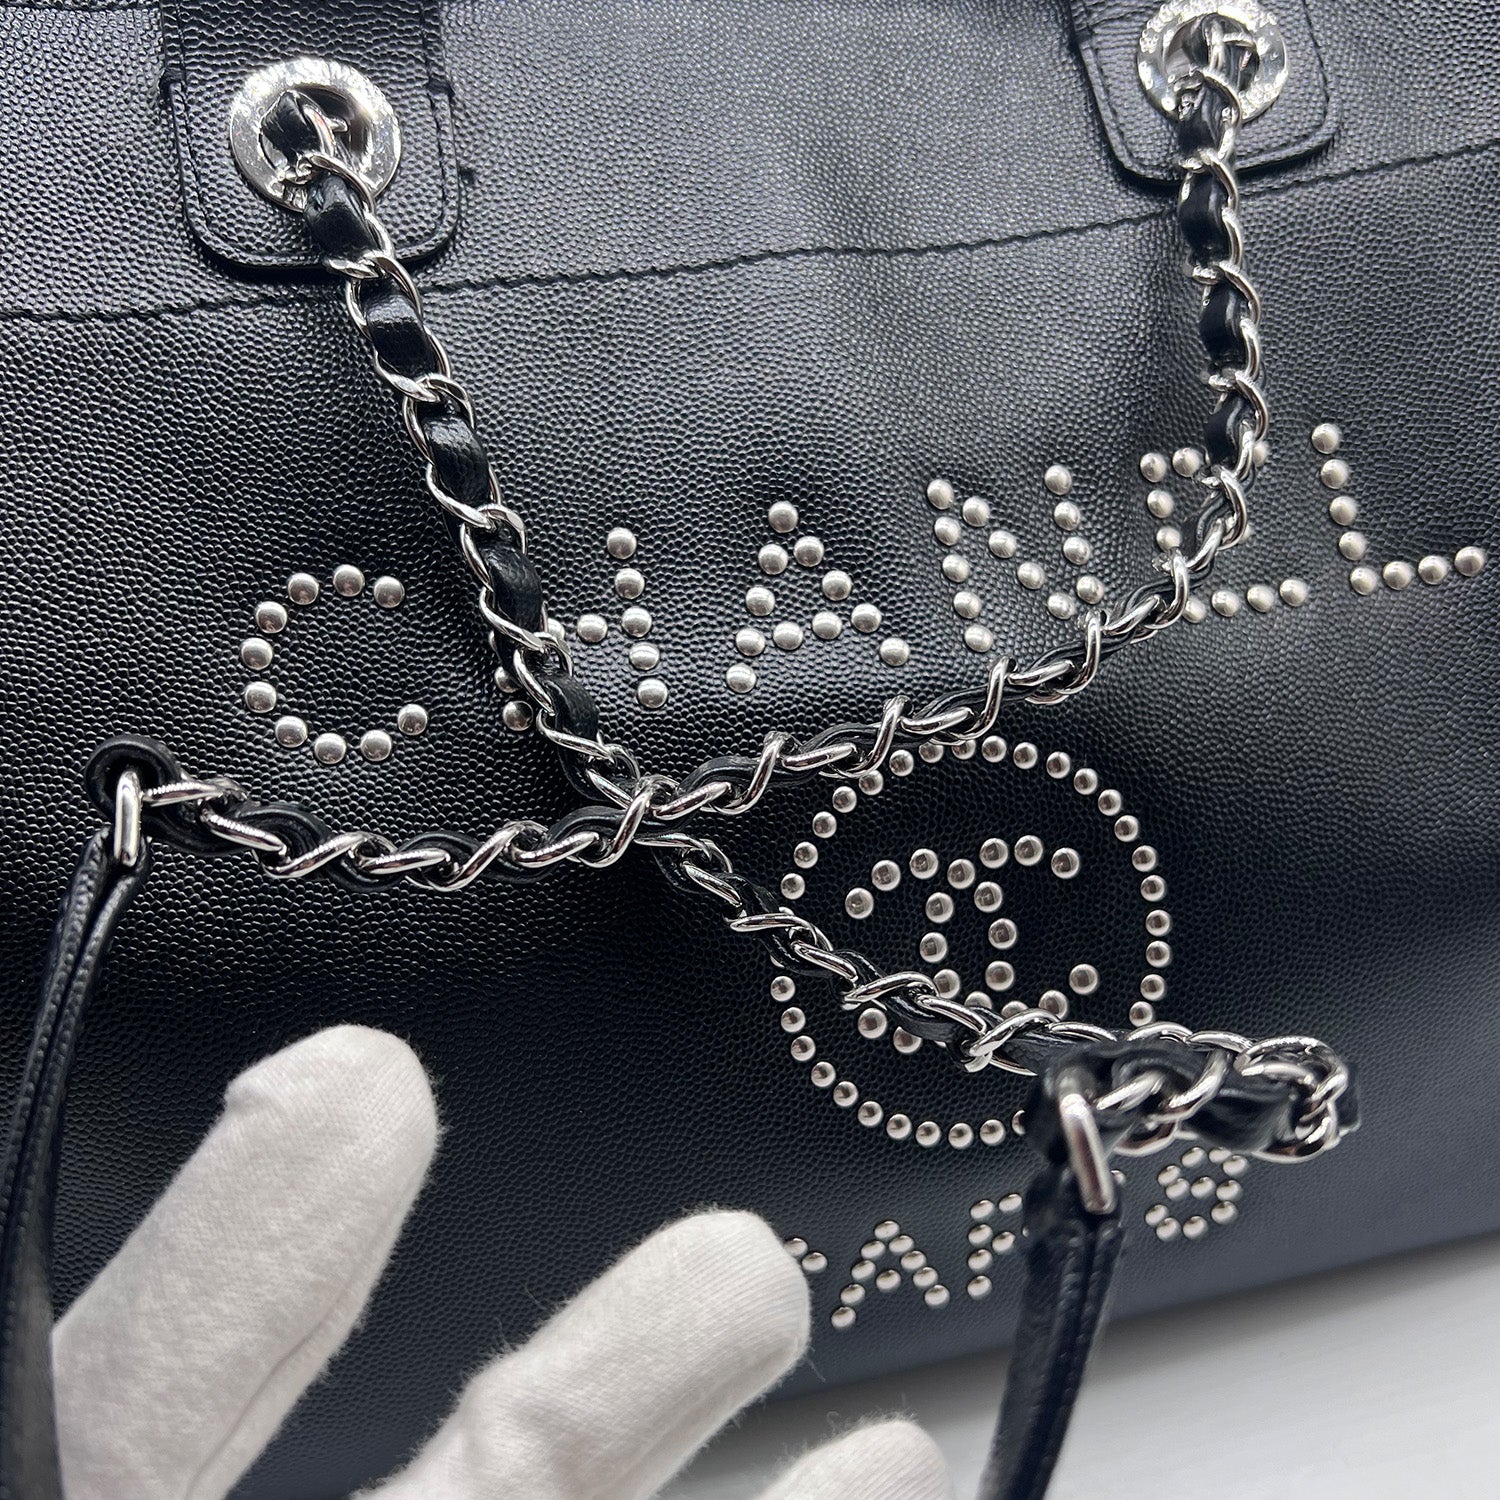 Chanel 101: The Shopping Tote - The Vault